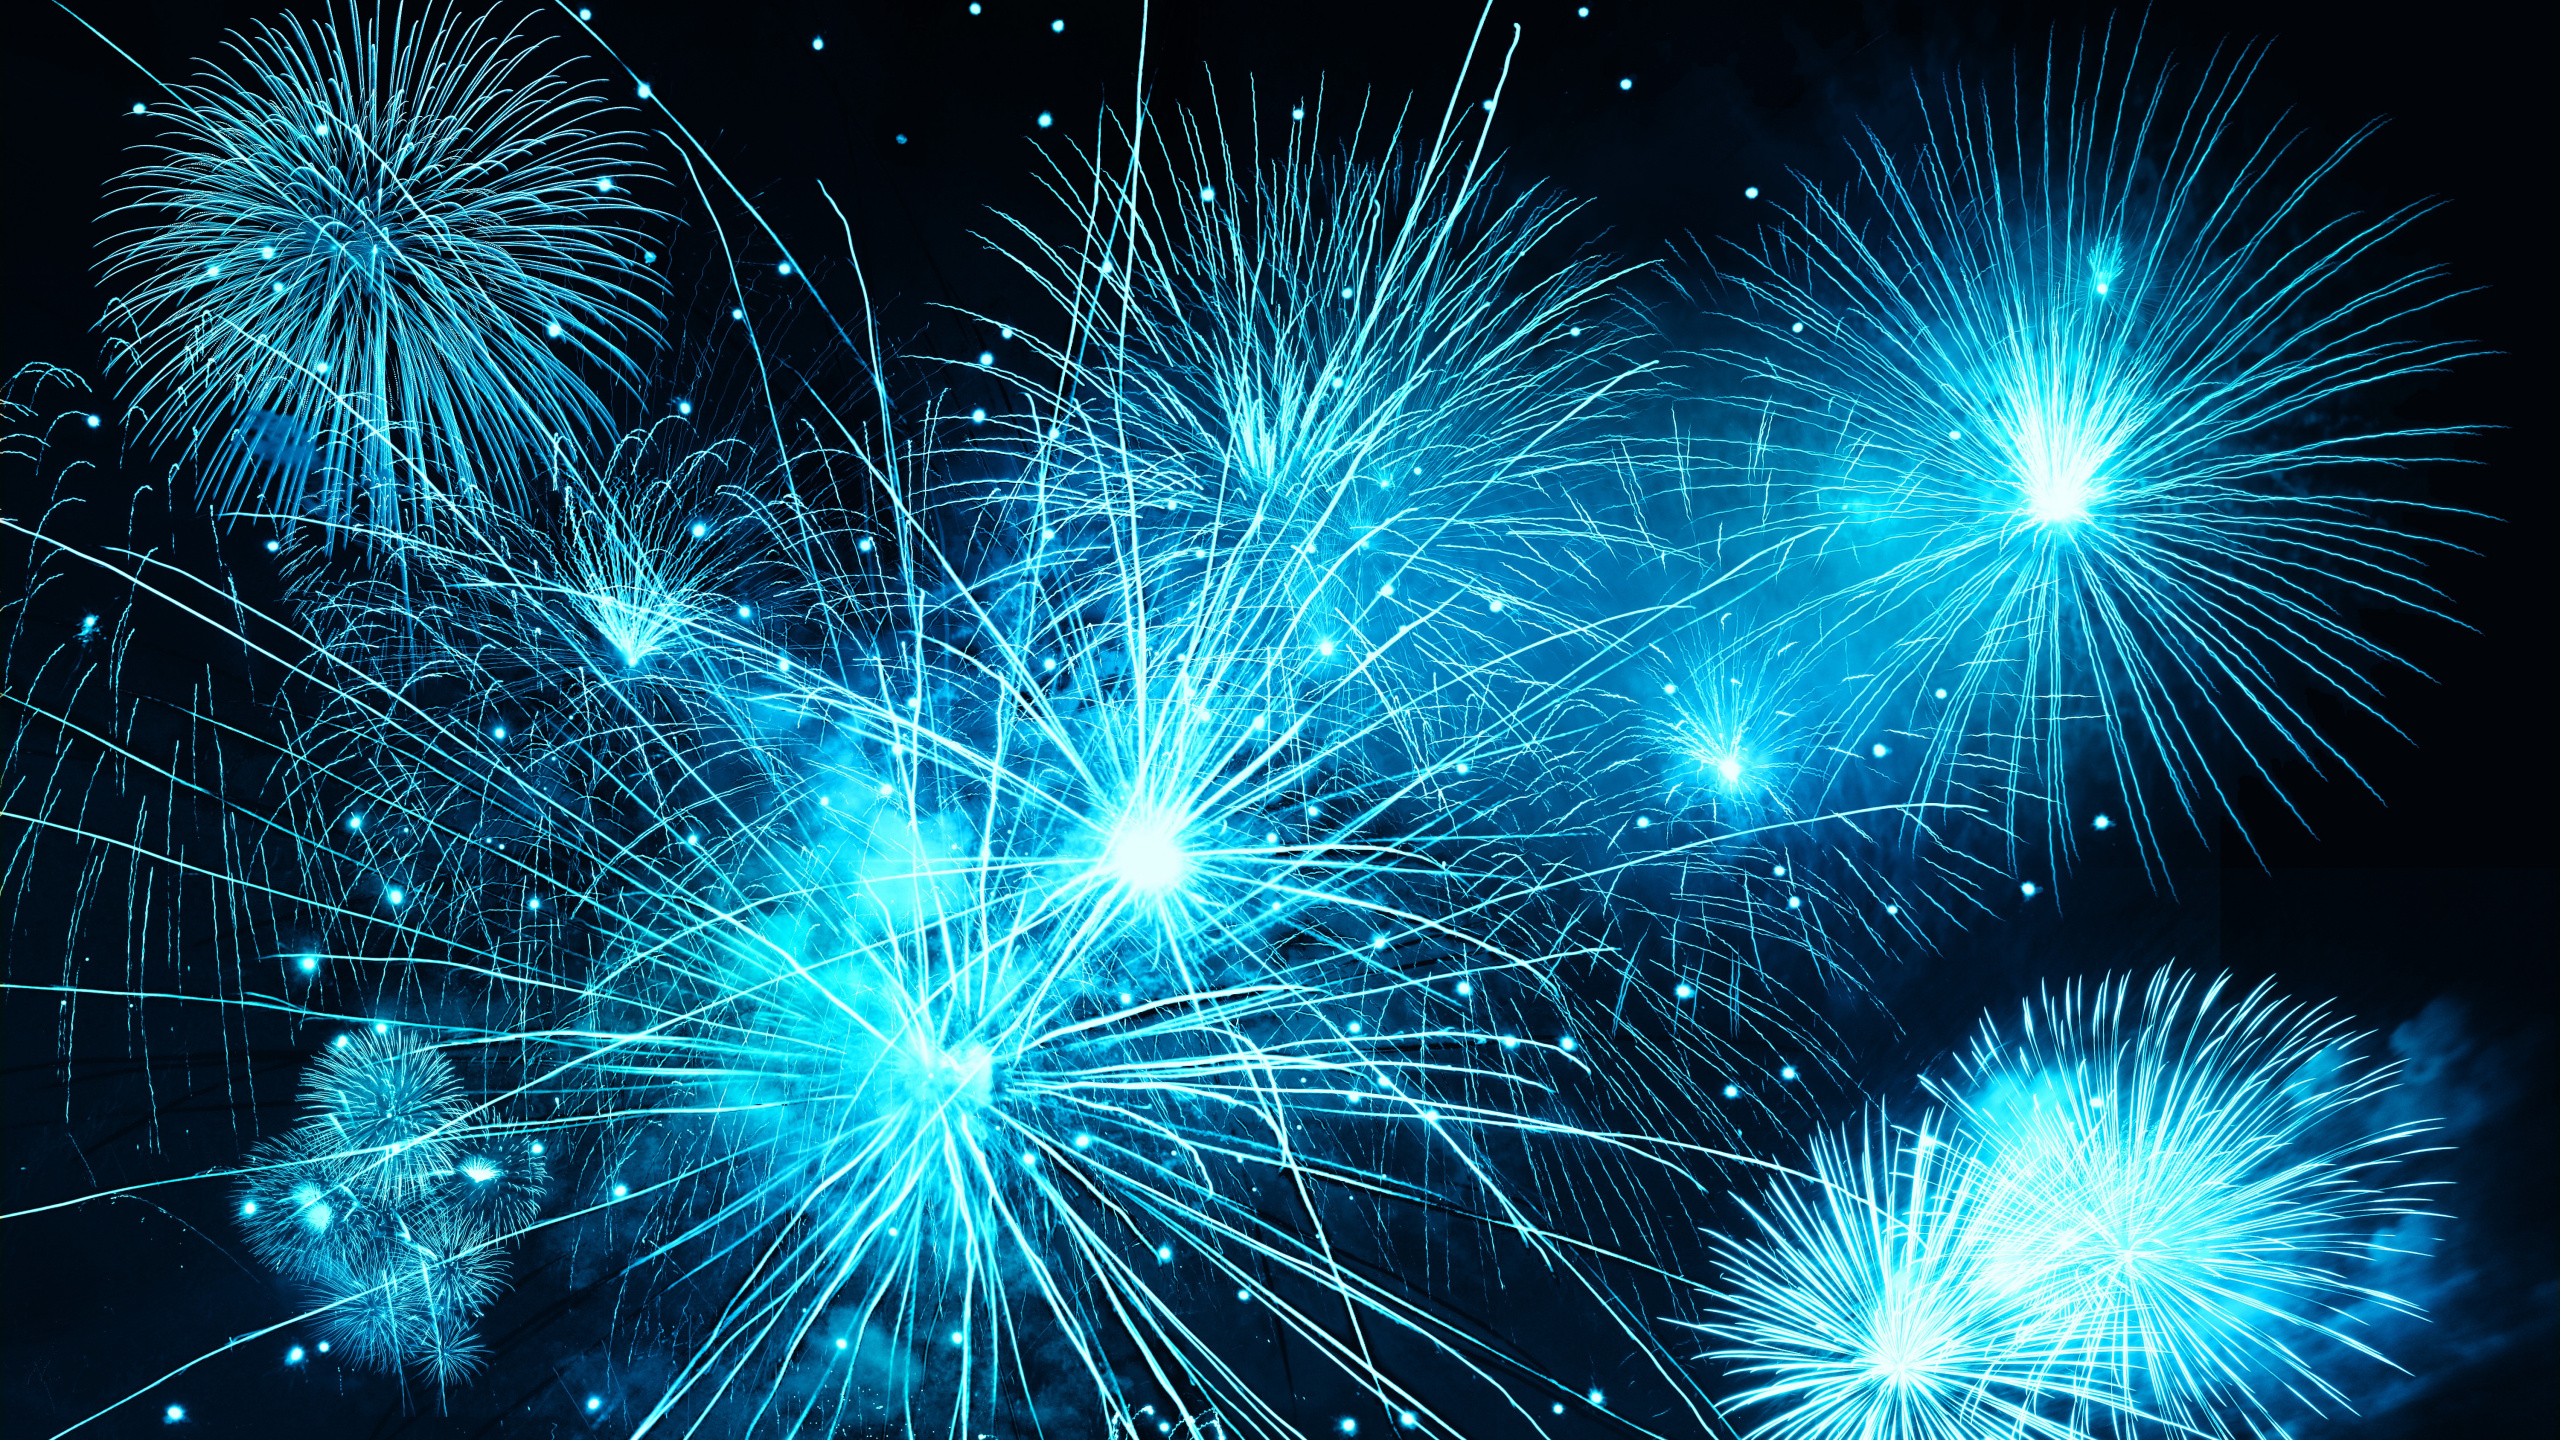 New Years Eve, New Year, New Years Day, Party, Fireworks. Wallpaper in 2560x1440 Resolution